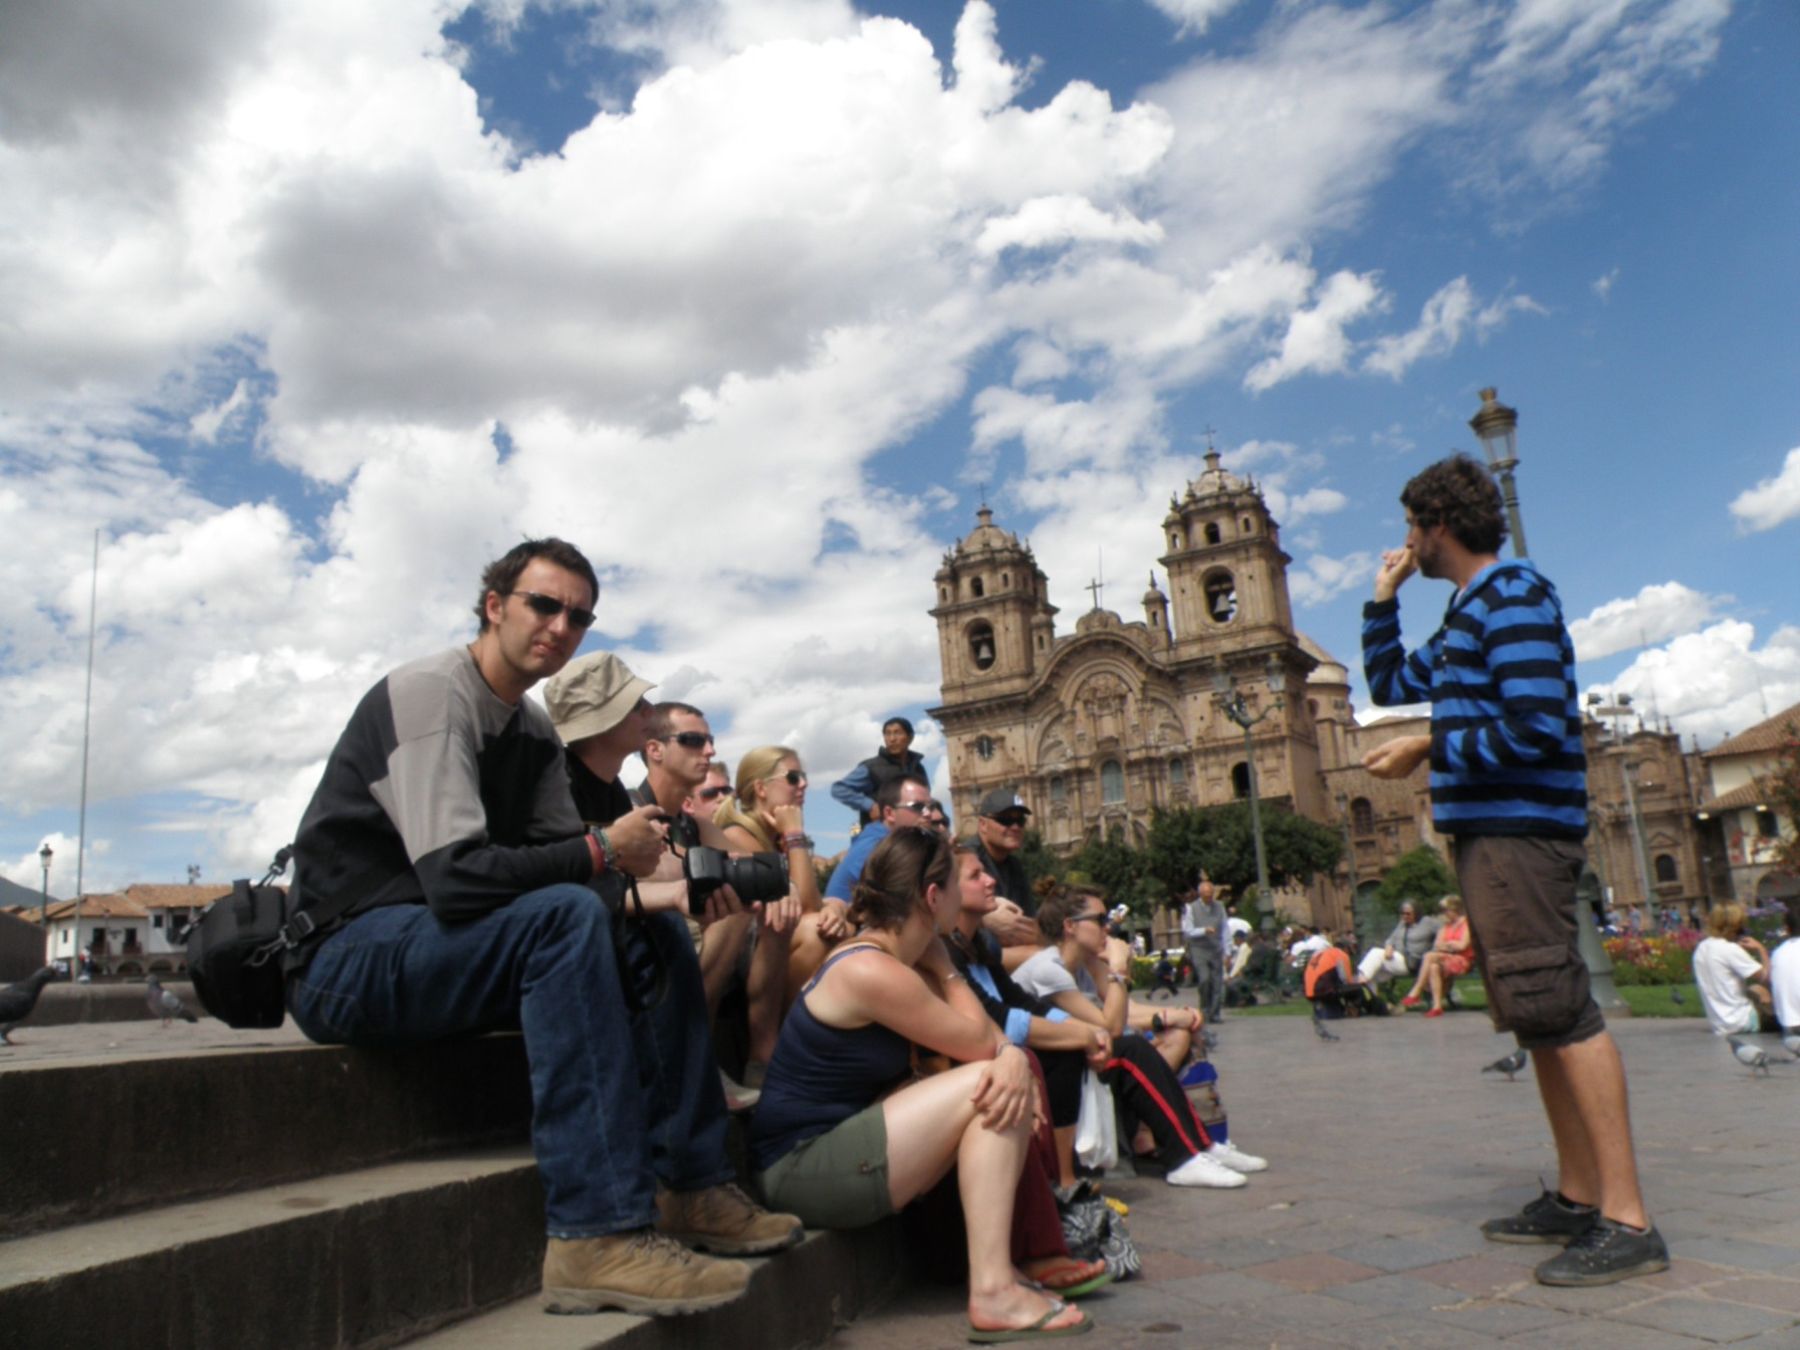 Tourists celebrated the coming of the new year in the Plaza de Armas in Cusco.